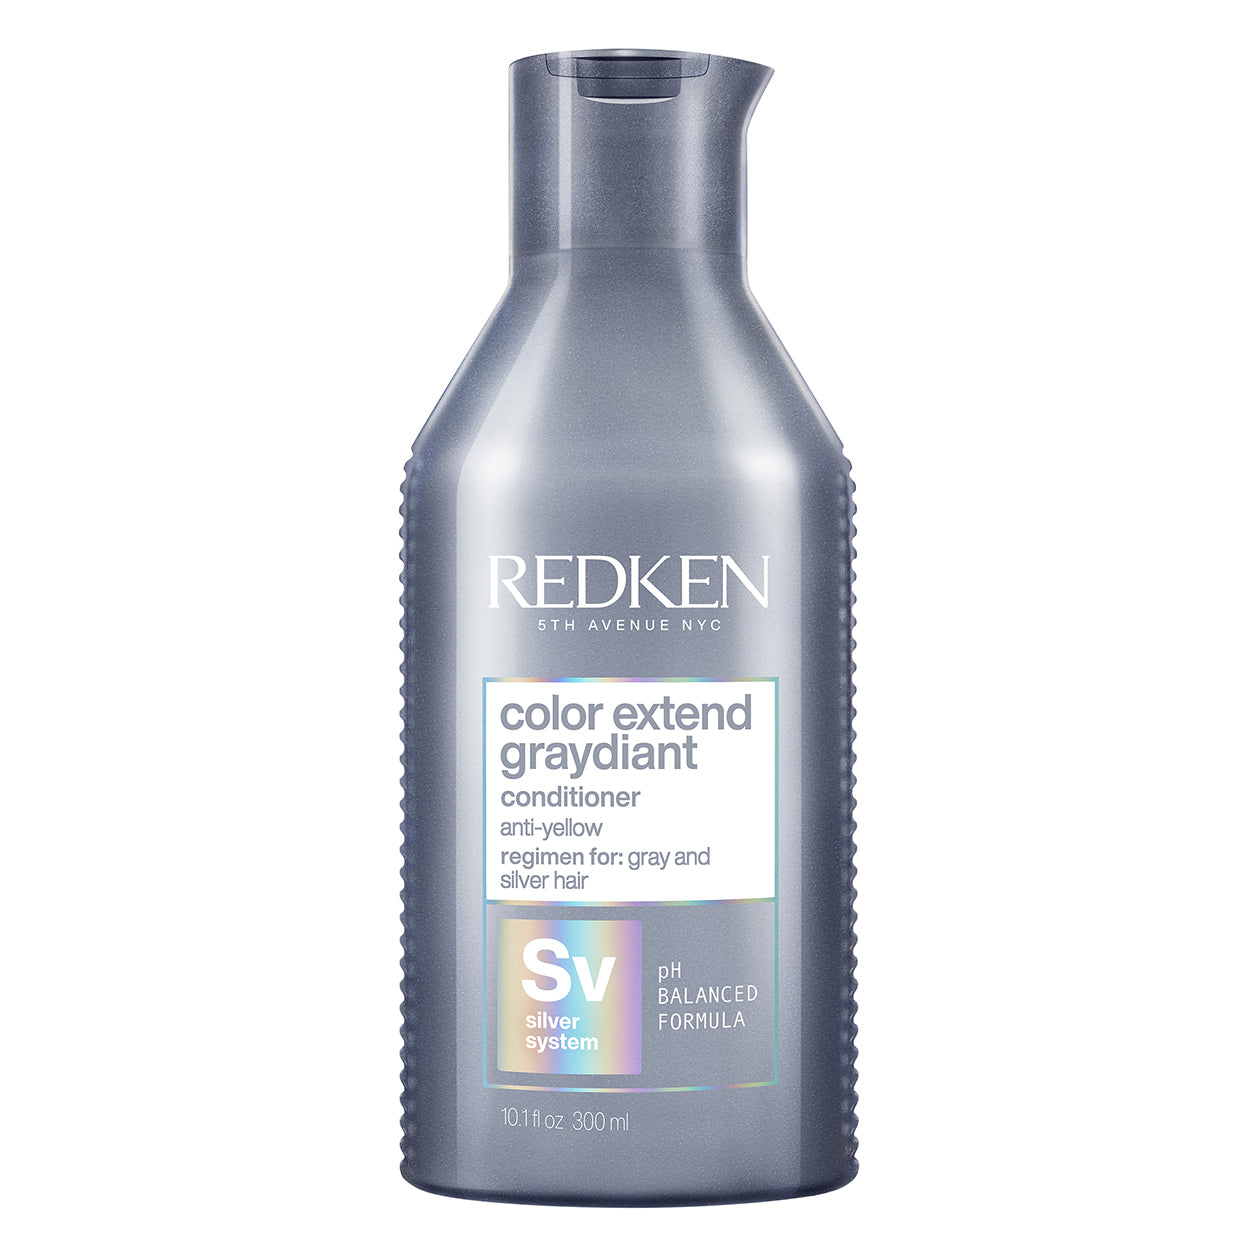 Langt væk Rubin peber Redken Color Extend Graydiant Conditioner 10.1oz / 300ml - Redken Hair  Products for Anti-yellow, Brightening, Softens, Regimen for Silver & Gray  Hair